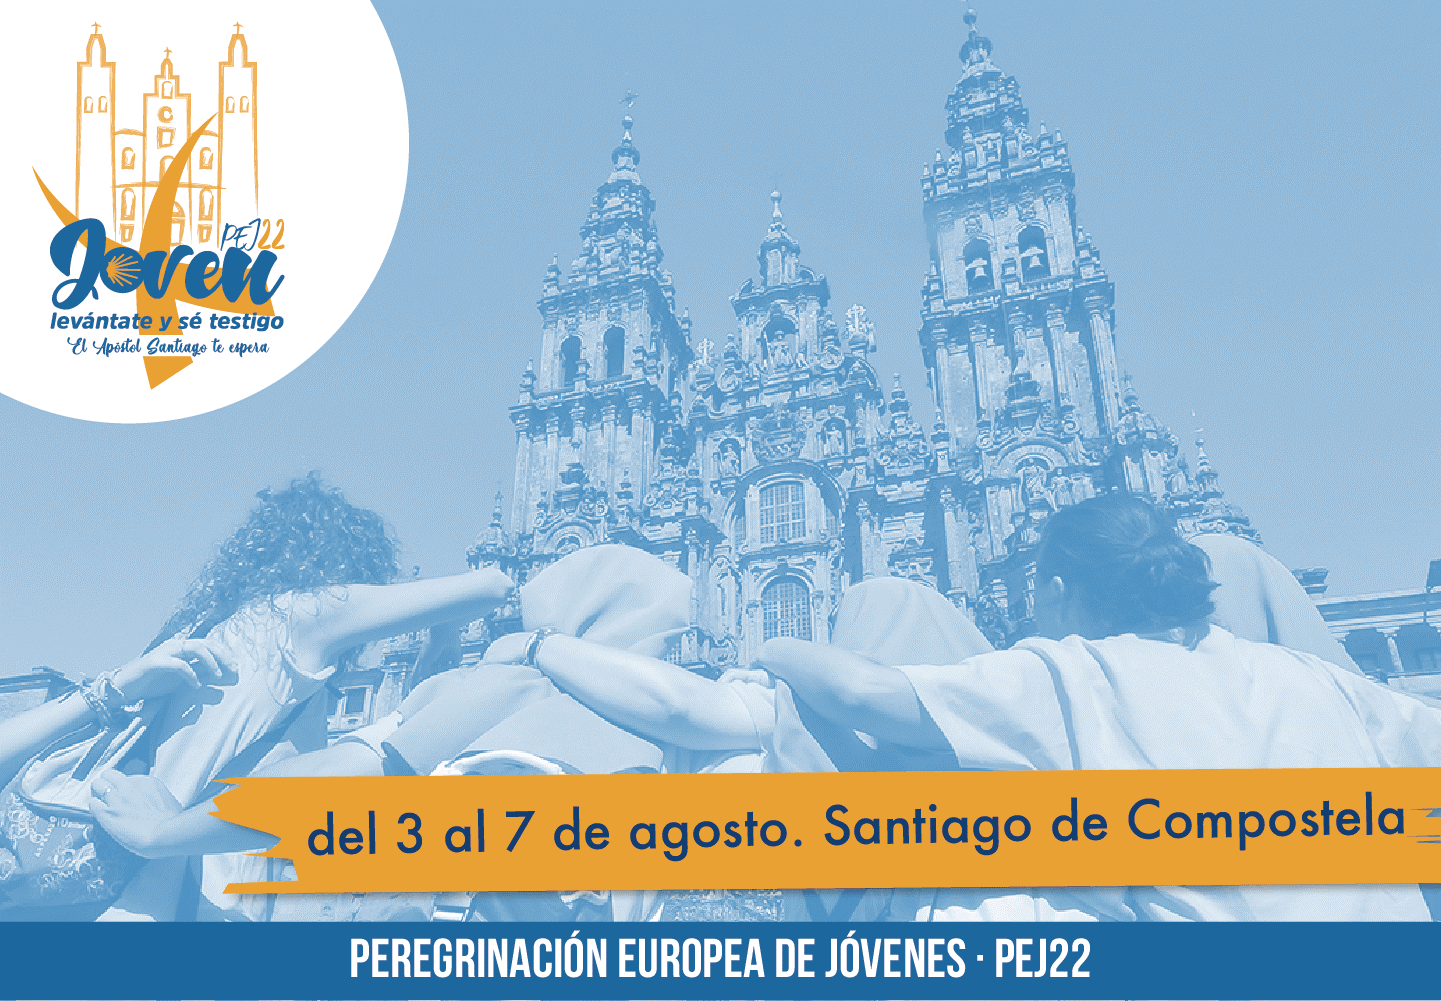 European Youth Pilgrimage to the Tomb of St James of Compostela in search of truth and life